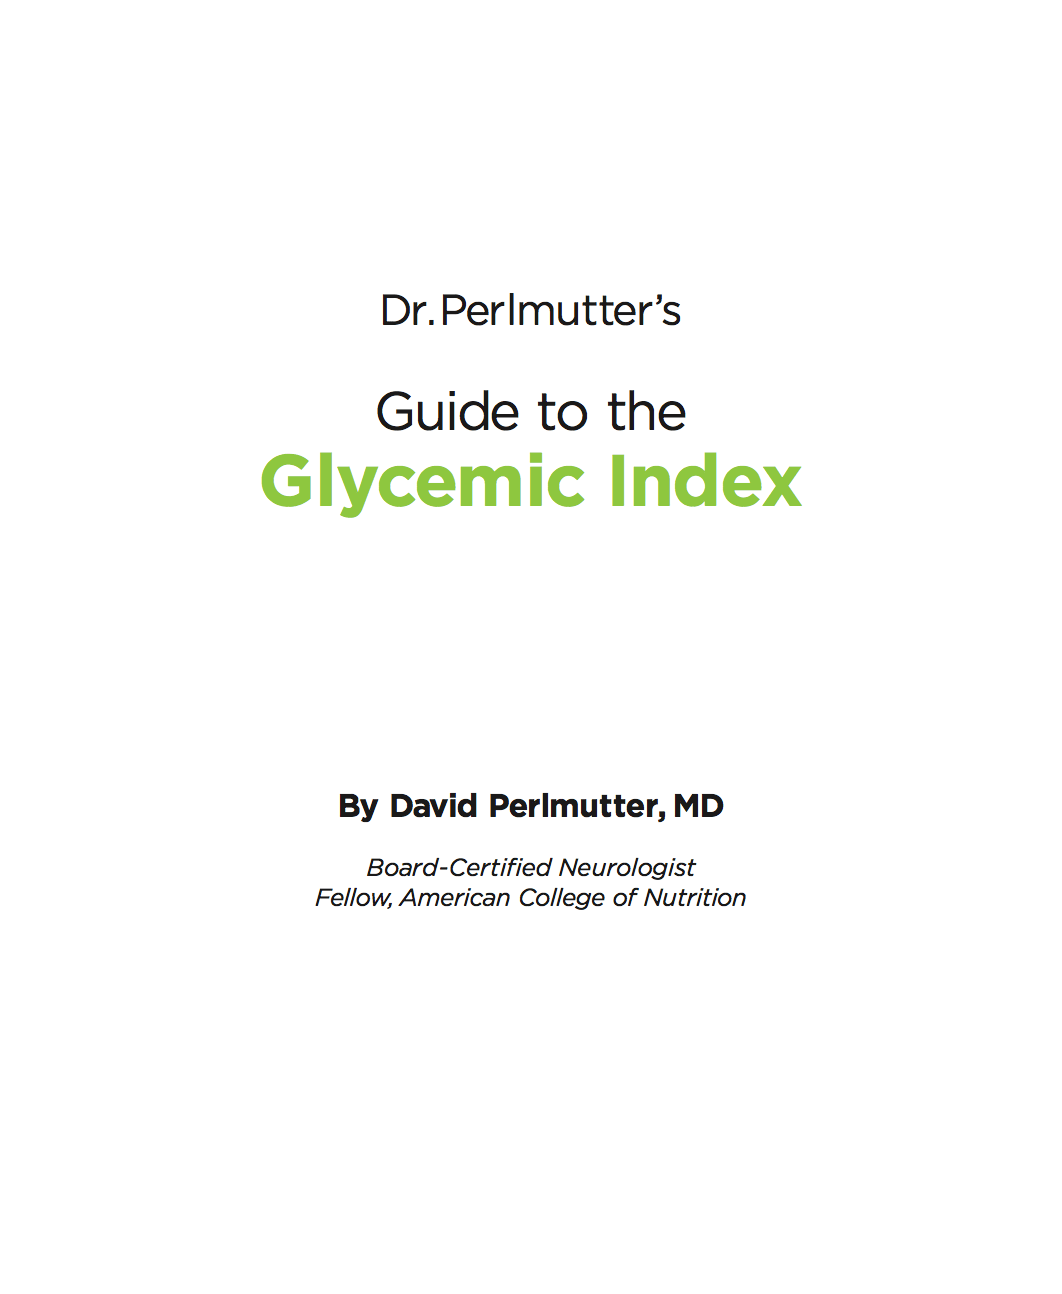 Your FREE Glycemic Index Guide